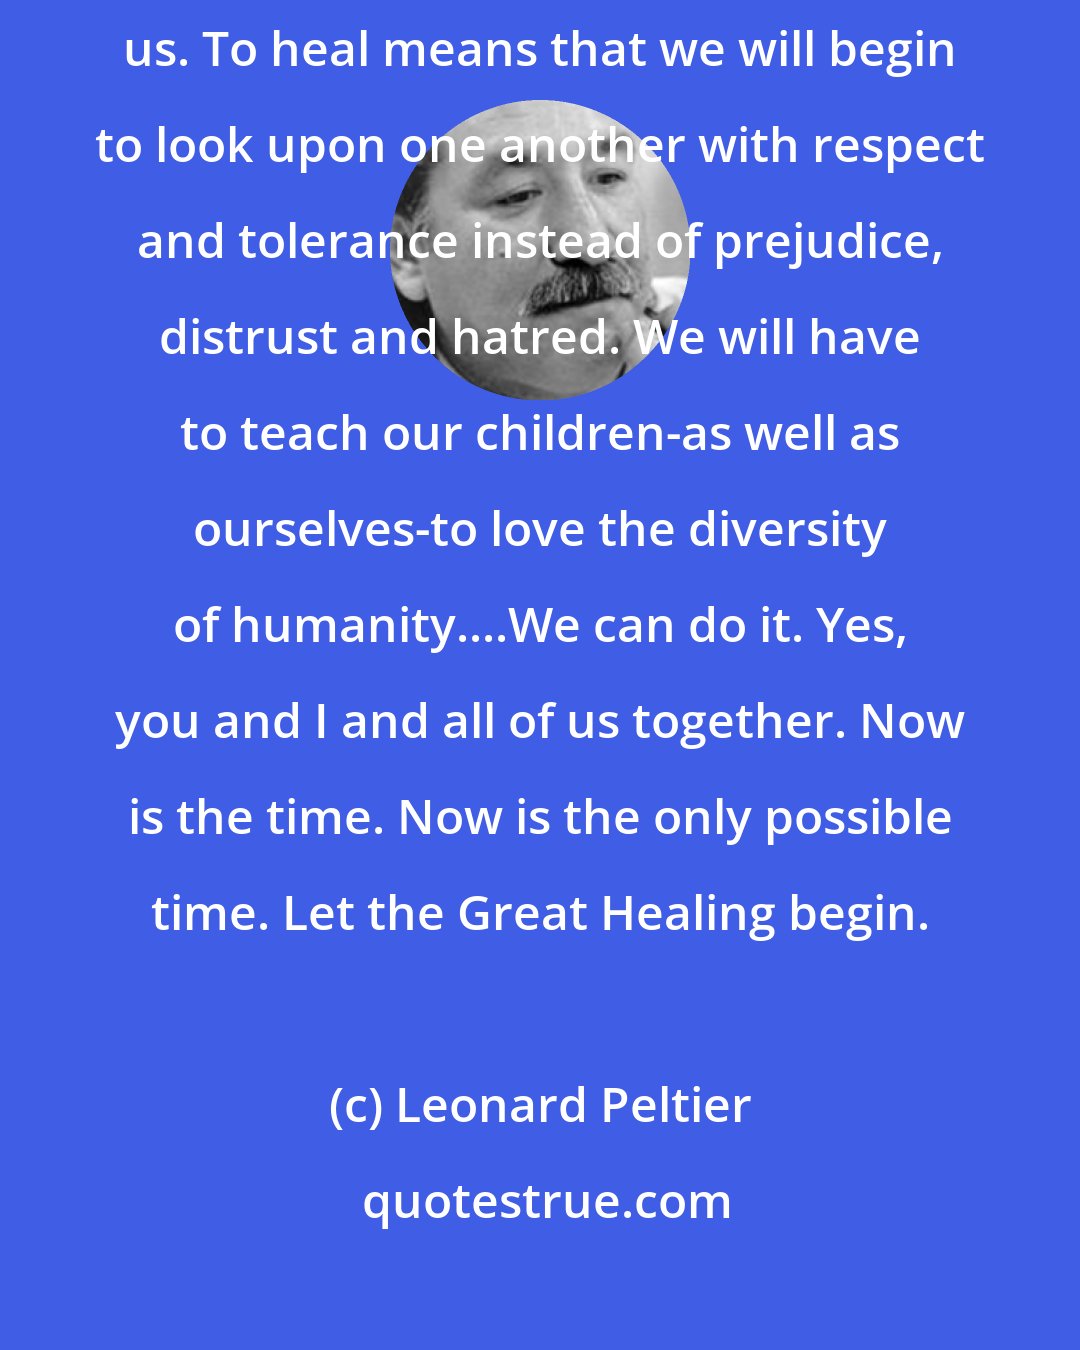 Leonard Peltier: To heal will require real effort, and a change of heart, from all of us. To heal means that we will begin to look upon one another with respect and tolerance instead of prejudice, distrust and hatred. We will have to teach our children-as well as ourselves-to love the diversity of humanity....We can do it. Yes, you and I and all of us together. Now is the time. Now is the only possible time. Let the Great Healing begin.